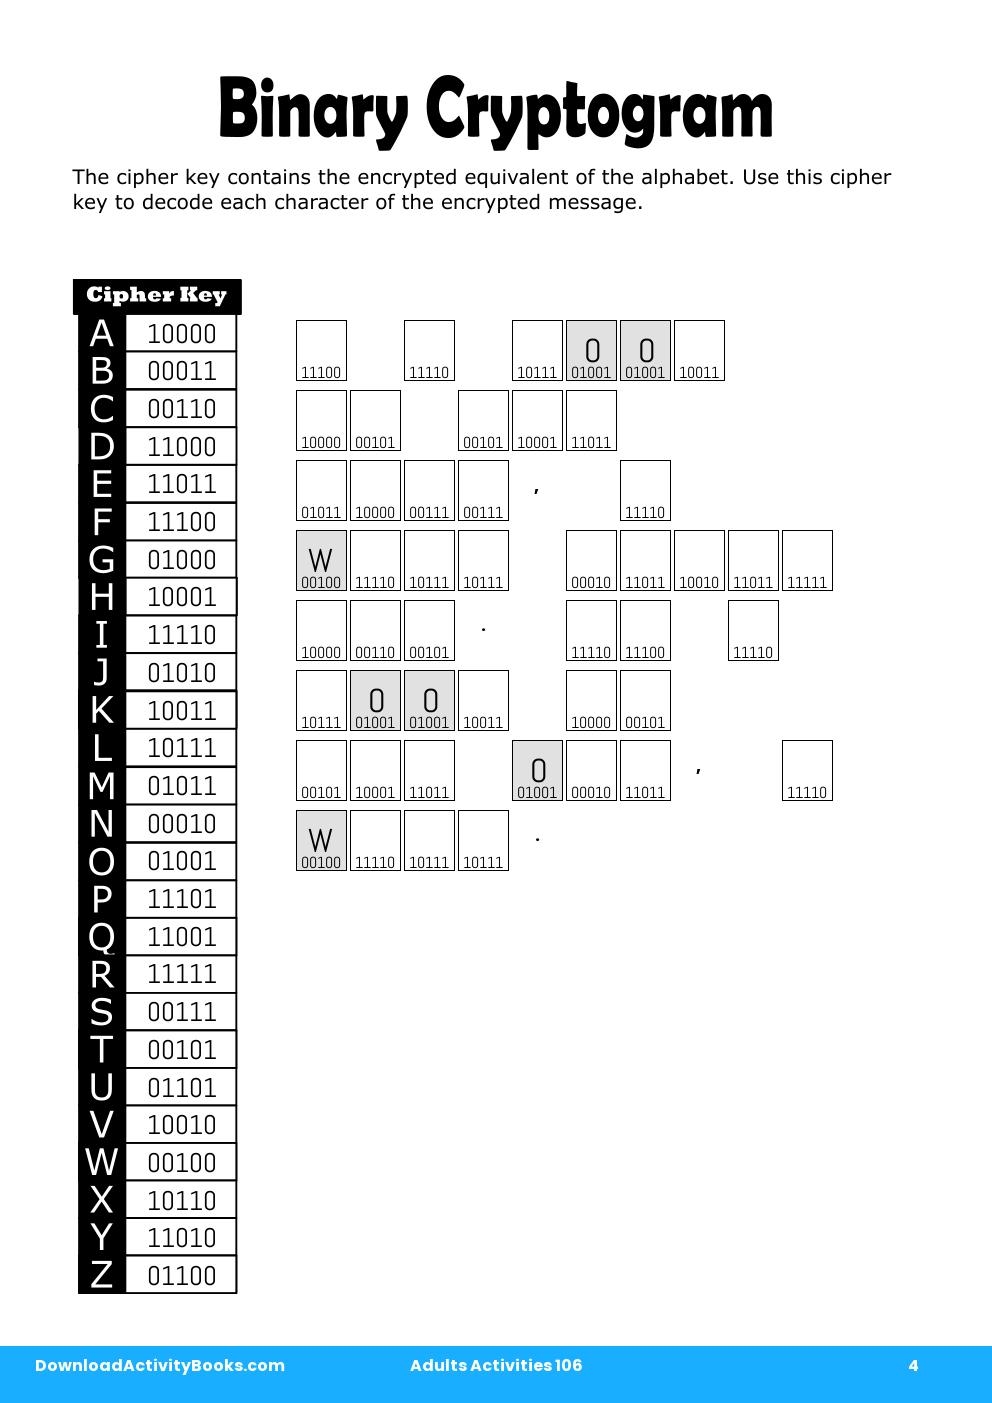 Binary Cryptogram in Adults Activities 106